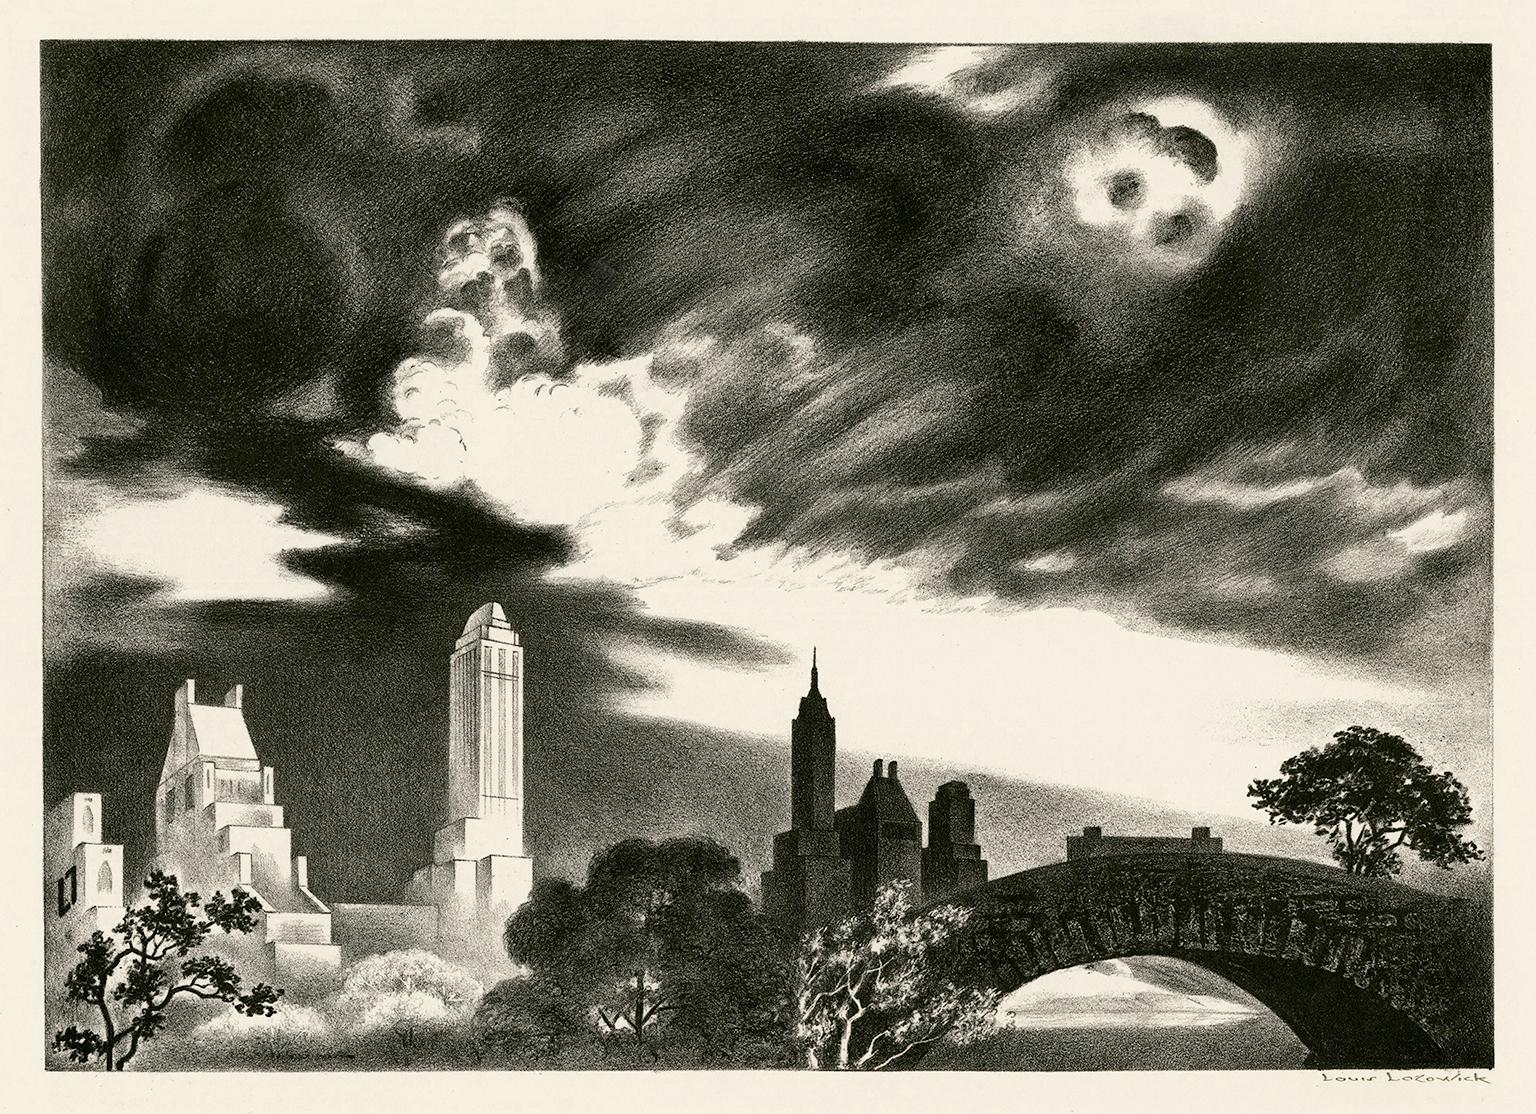 Landscape Print Louis Lozowick - Angry Skies (Andante Cantabile) - Central Park, New York City